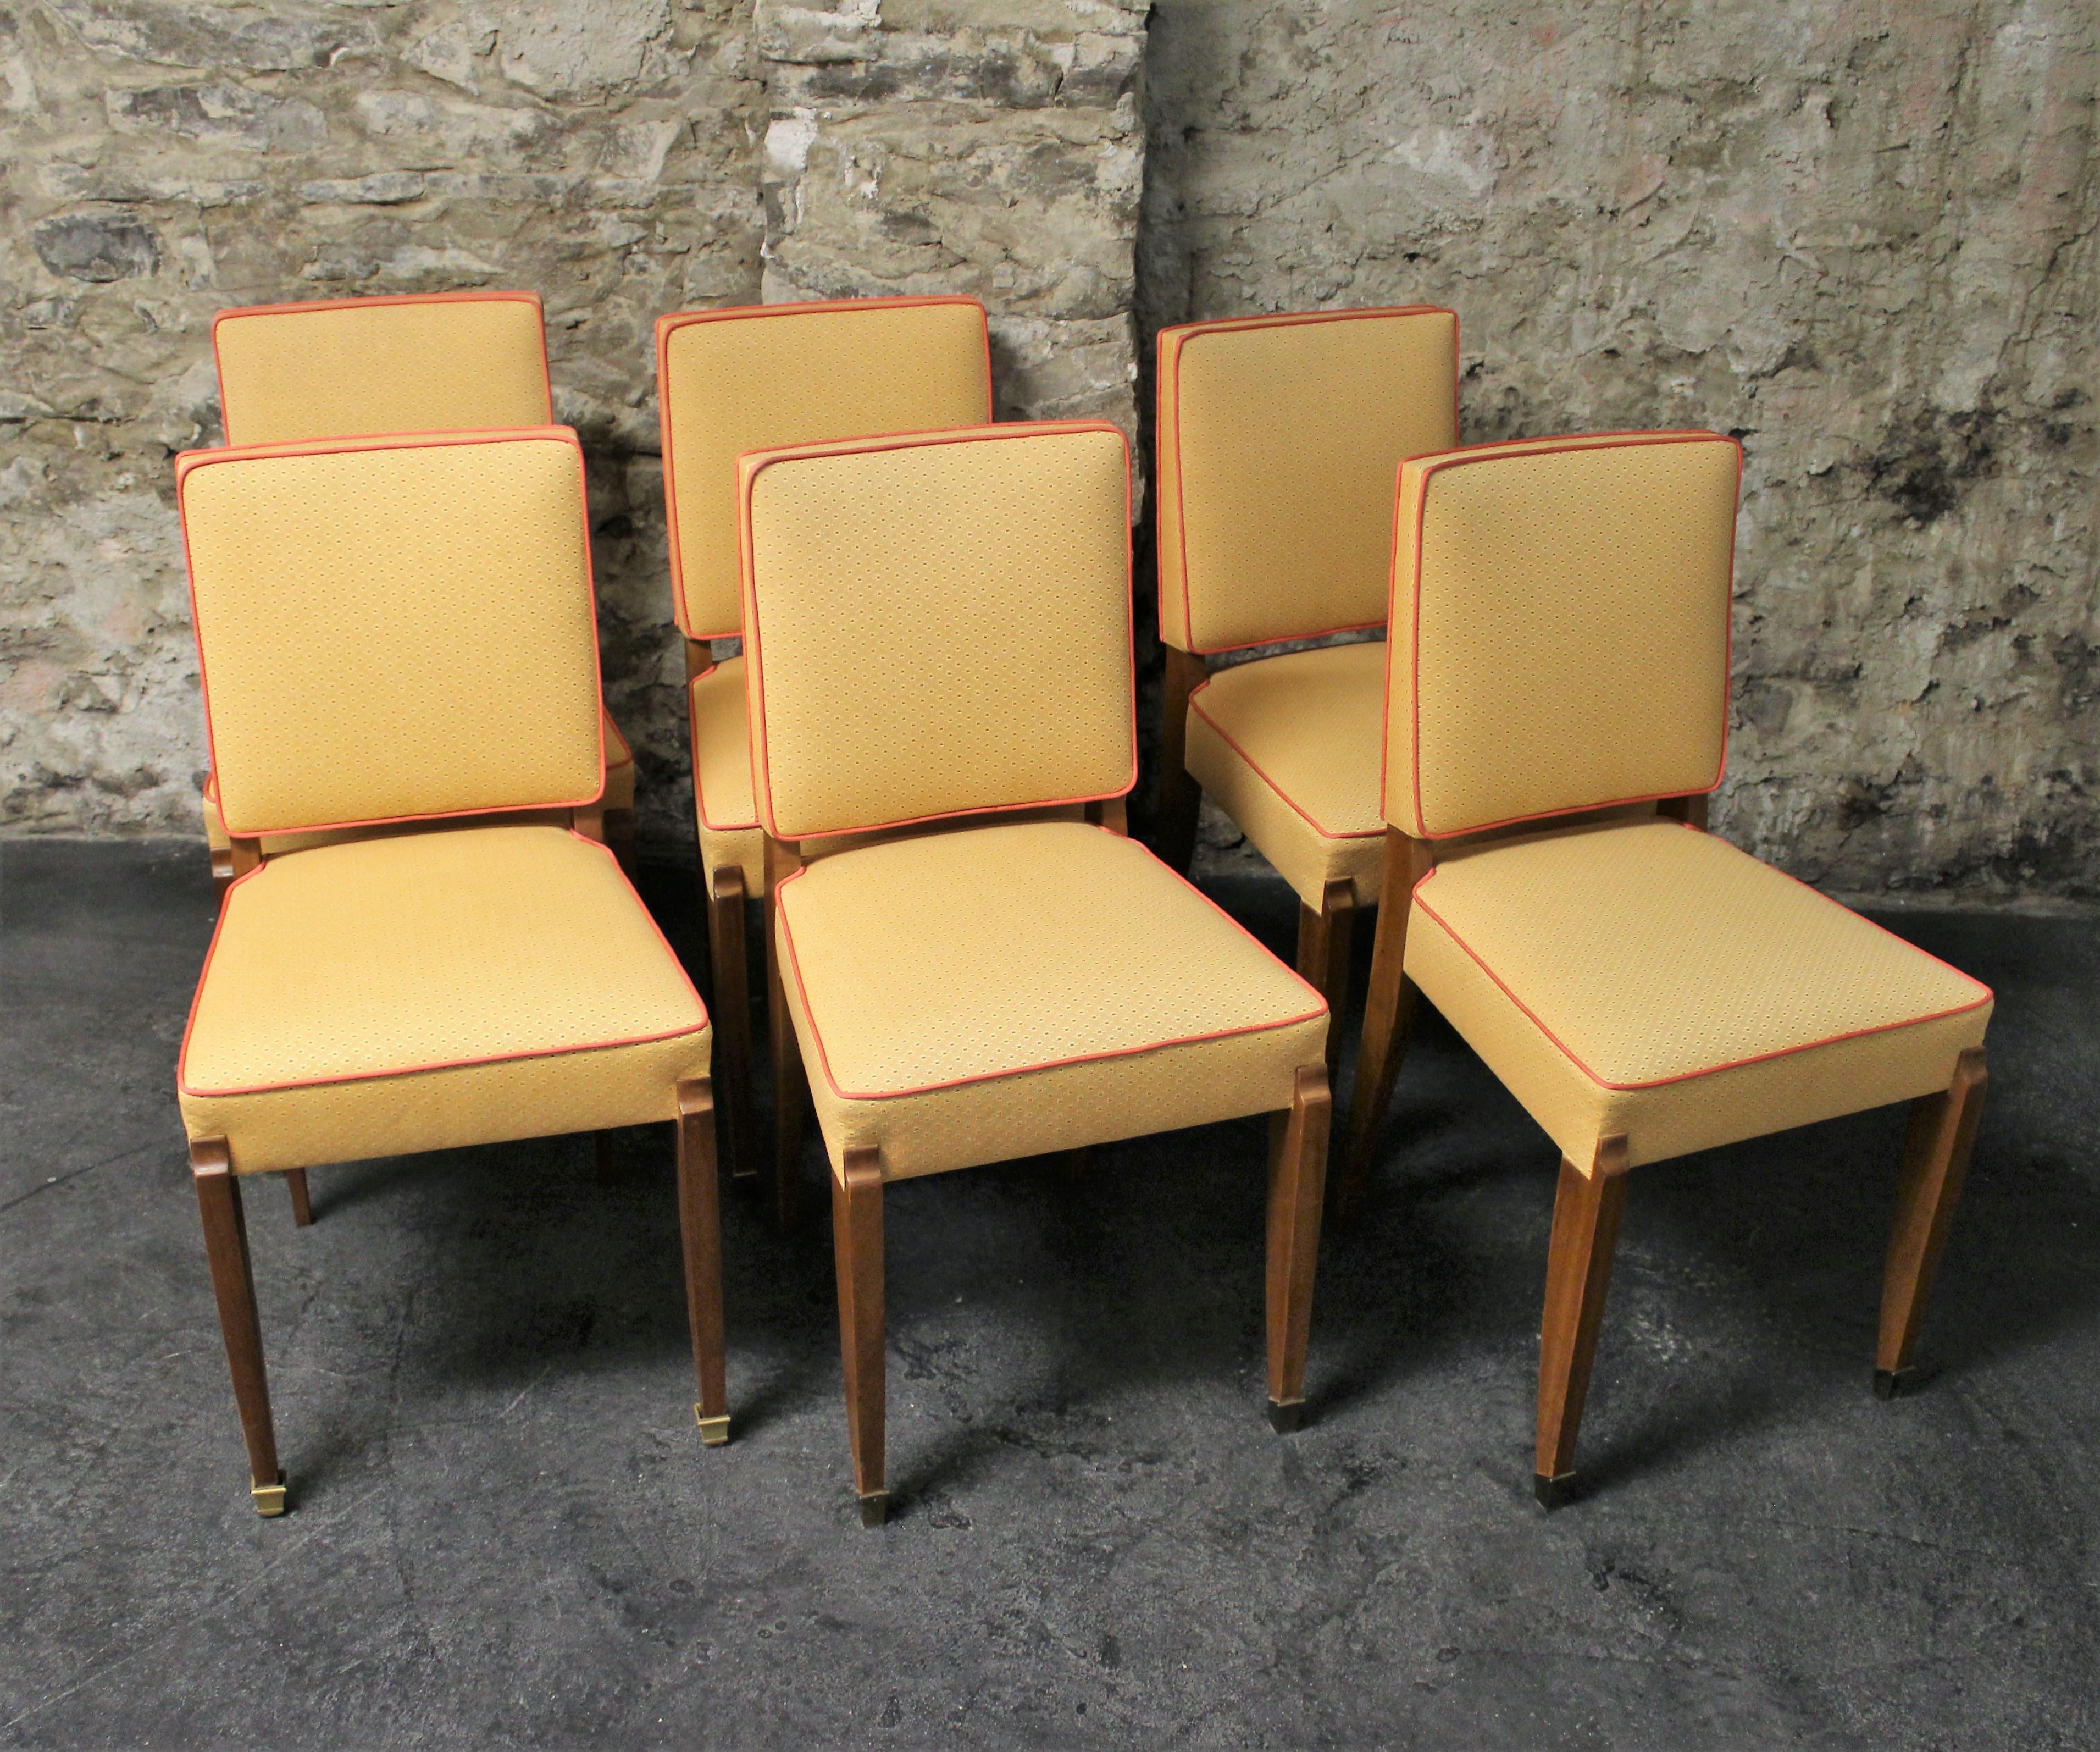 Six French Art Deco Dining Room Chairs 4